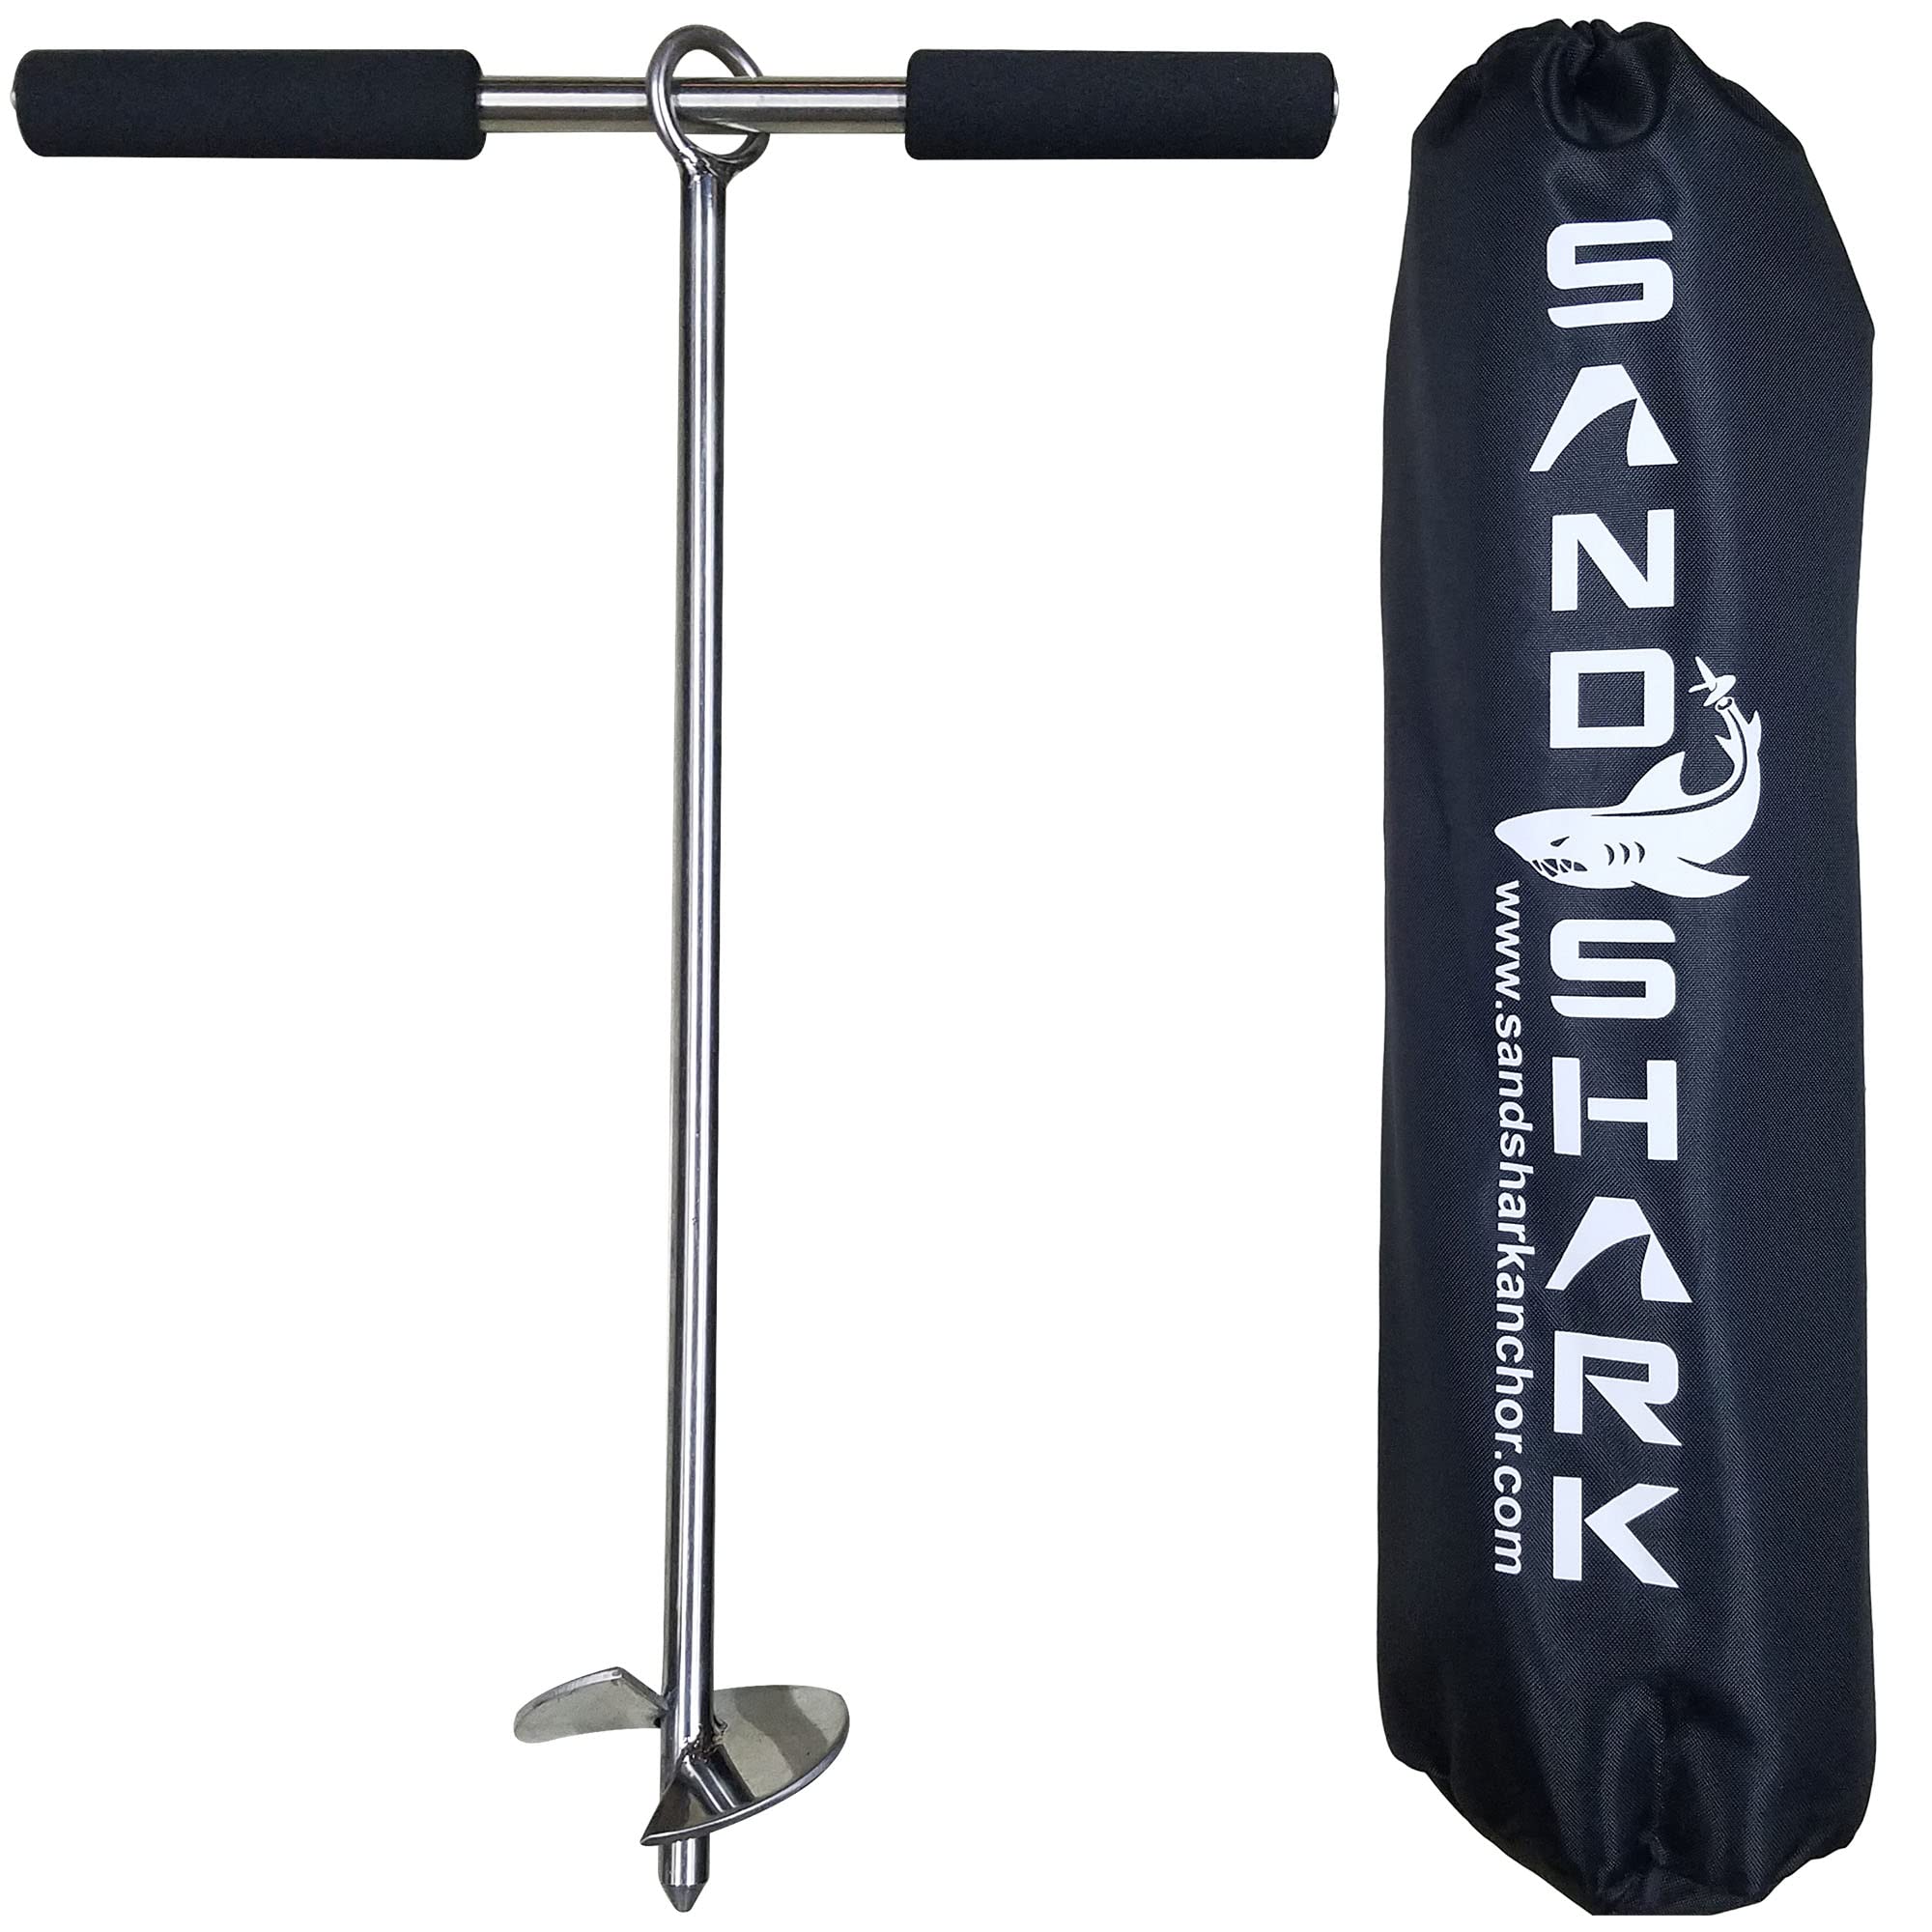 SandShark 18 inch Lite Series Boat Anchor - Shallow Water Anchor Pole - Jet Ski Anchor, Kayak Anchor, Pontoon Boat Accessories for Beach and Sandbar - Stainless Steel w/Handle and Rip-Stop Padded Case